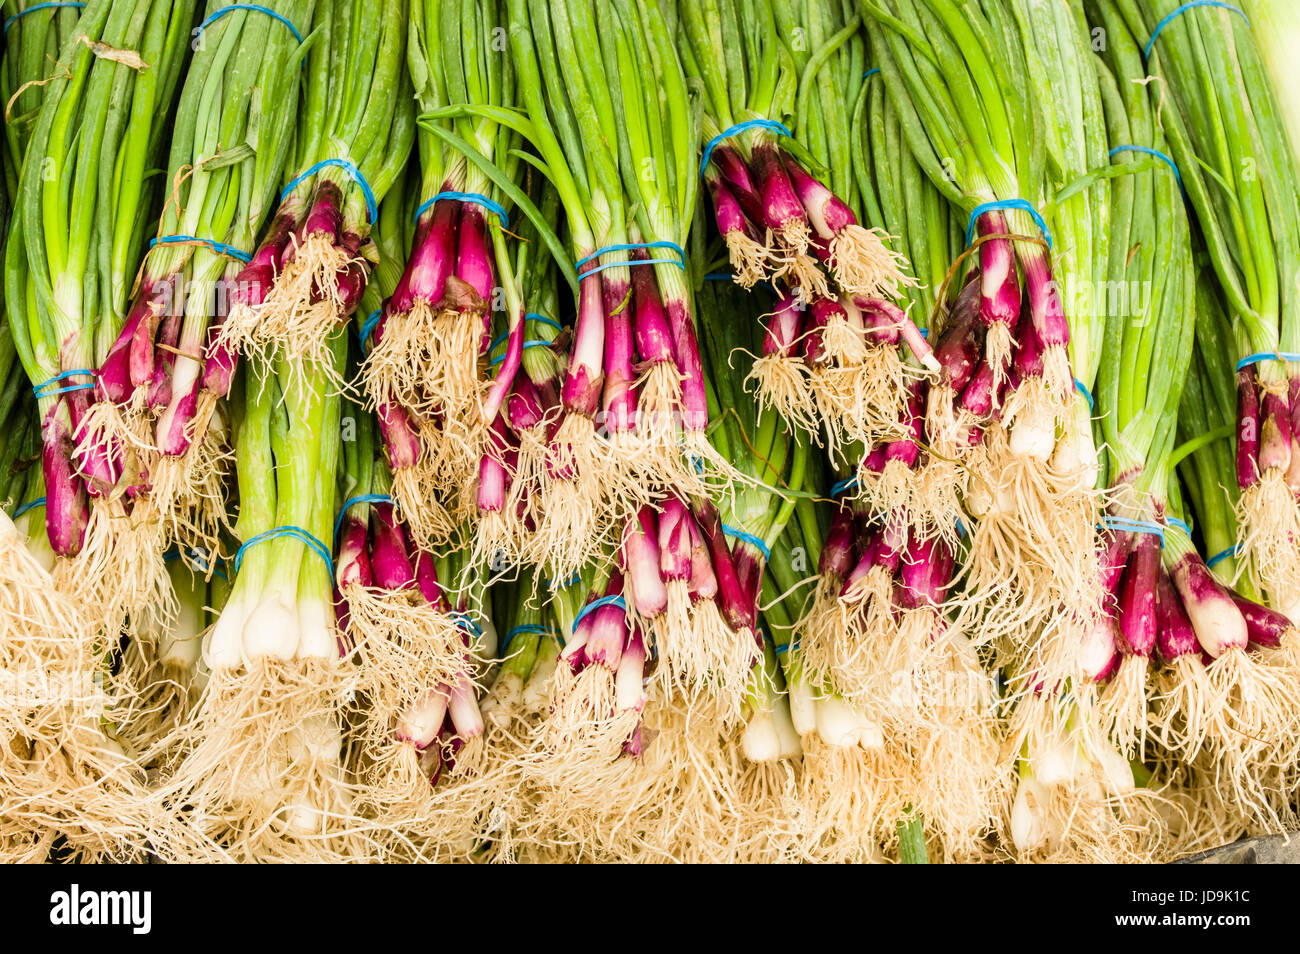 Display of red scallions at the farm market Stock Photo